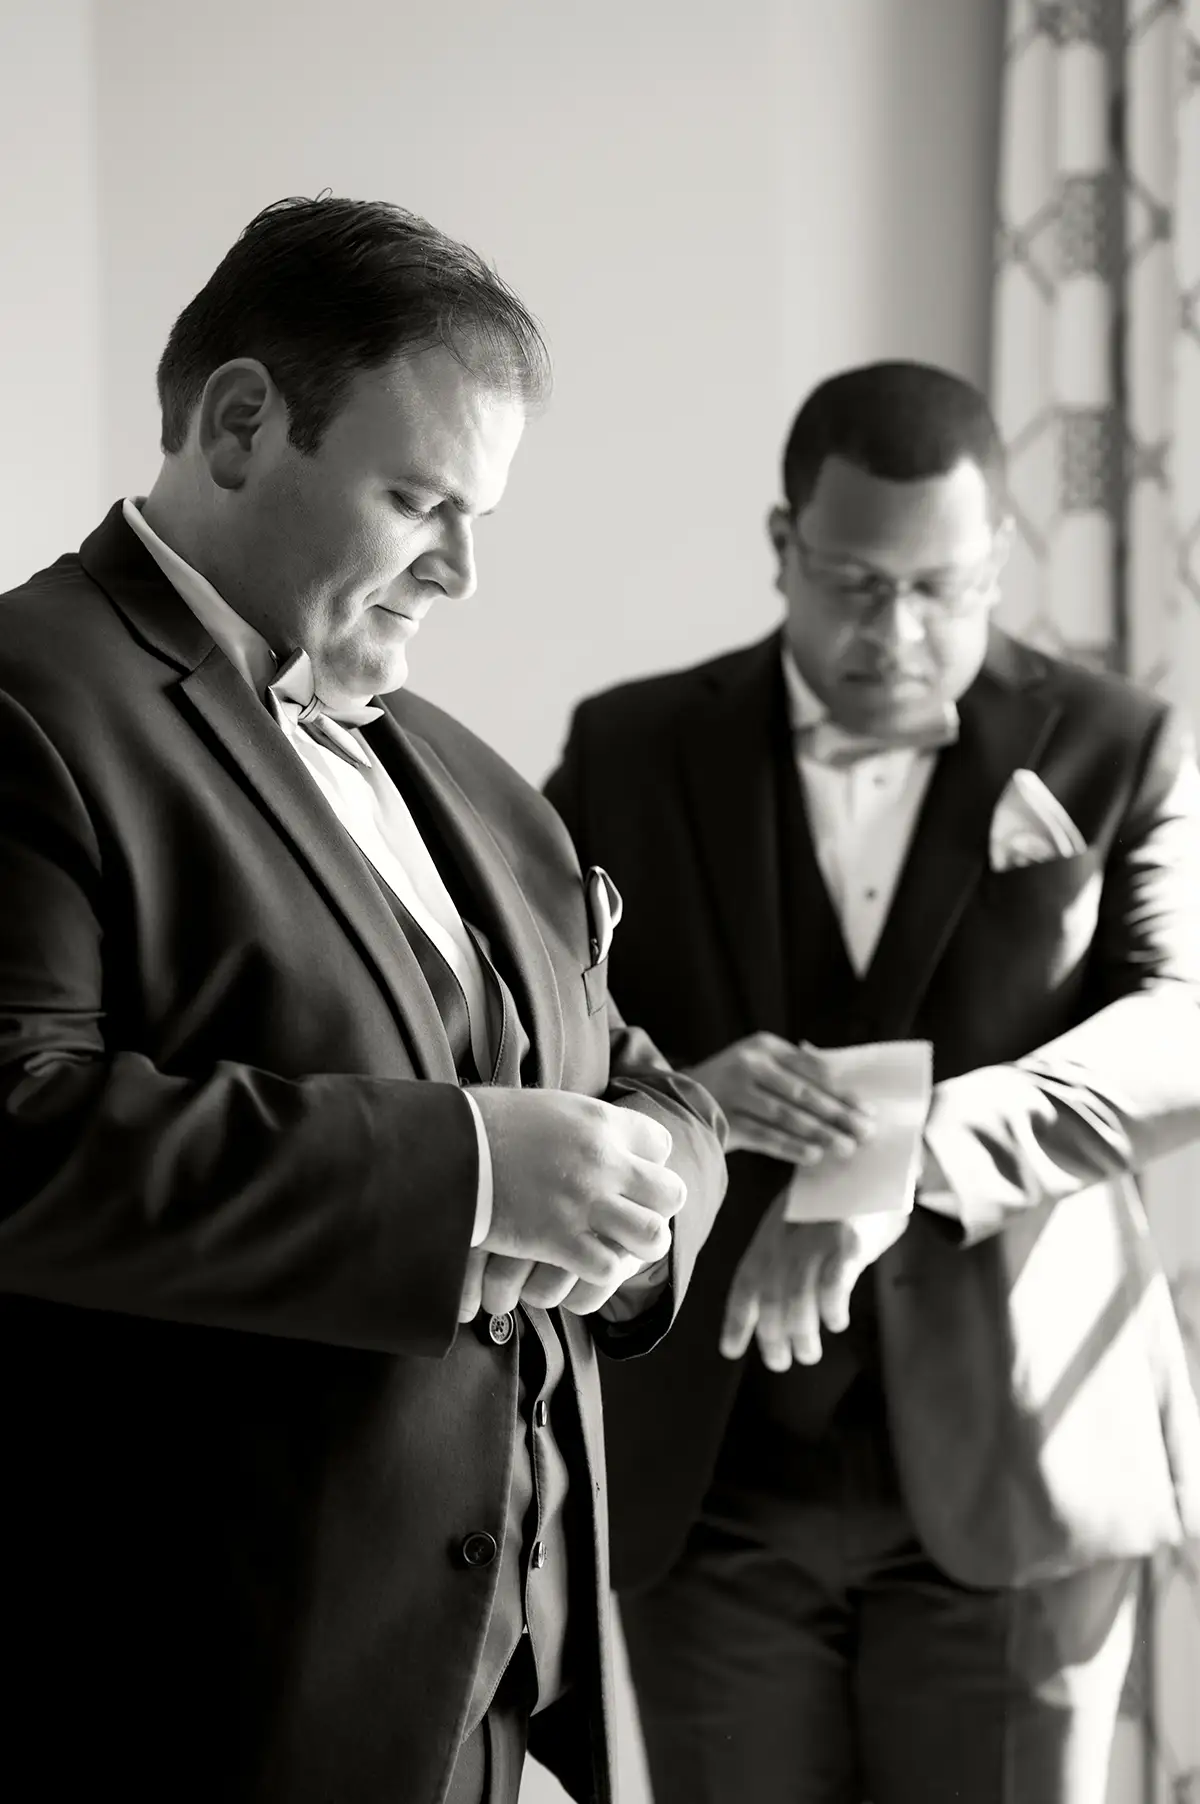 Black and white photo of two grooms getting ready together for their wedding. One groom is white, and the other groom is Black and wearing glasses.